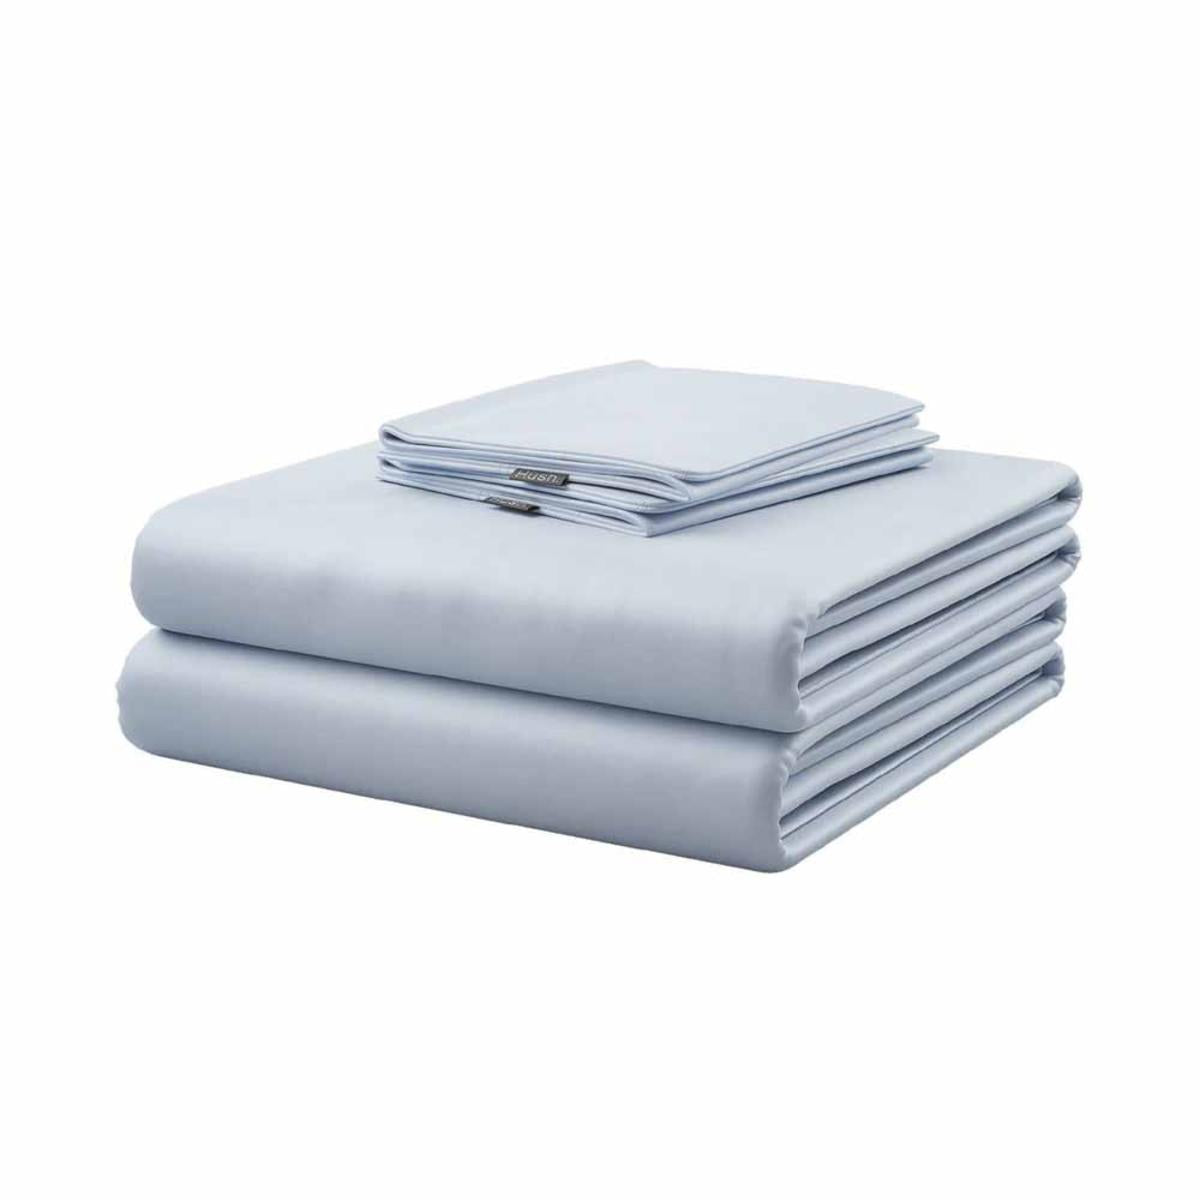 Hush Iced Cooling Sheet and Pillowcase Set - Twin